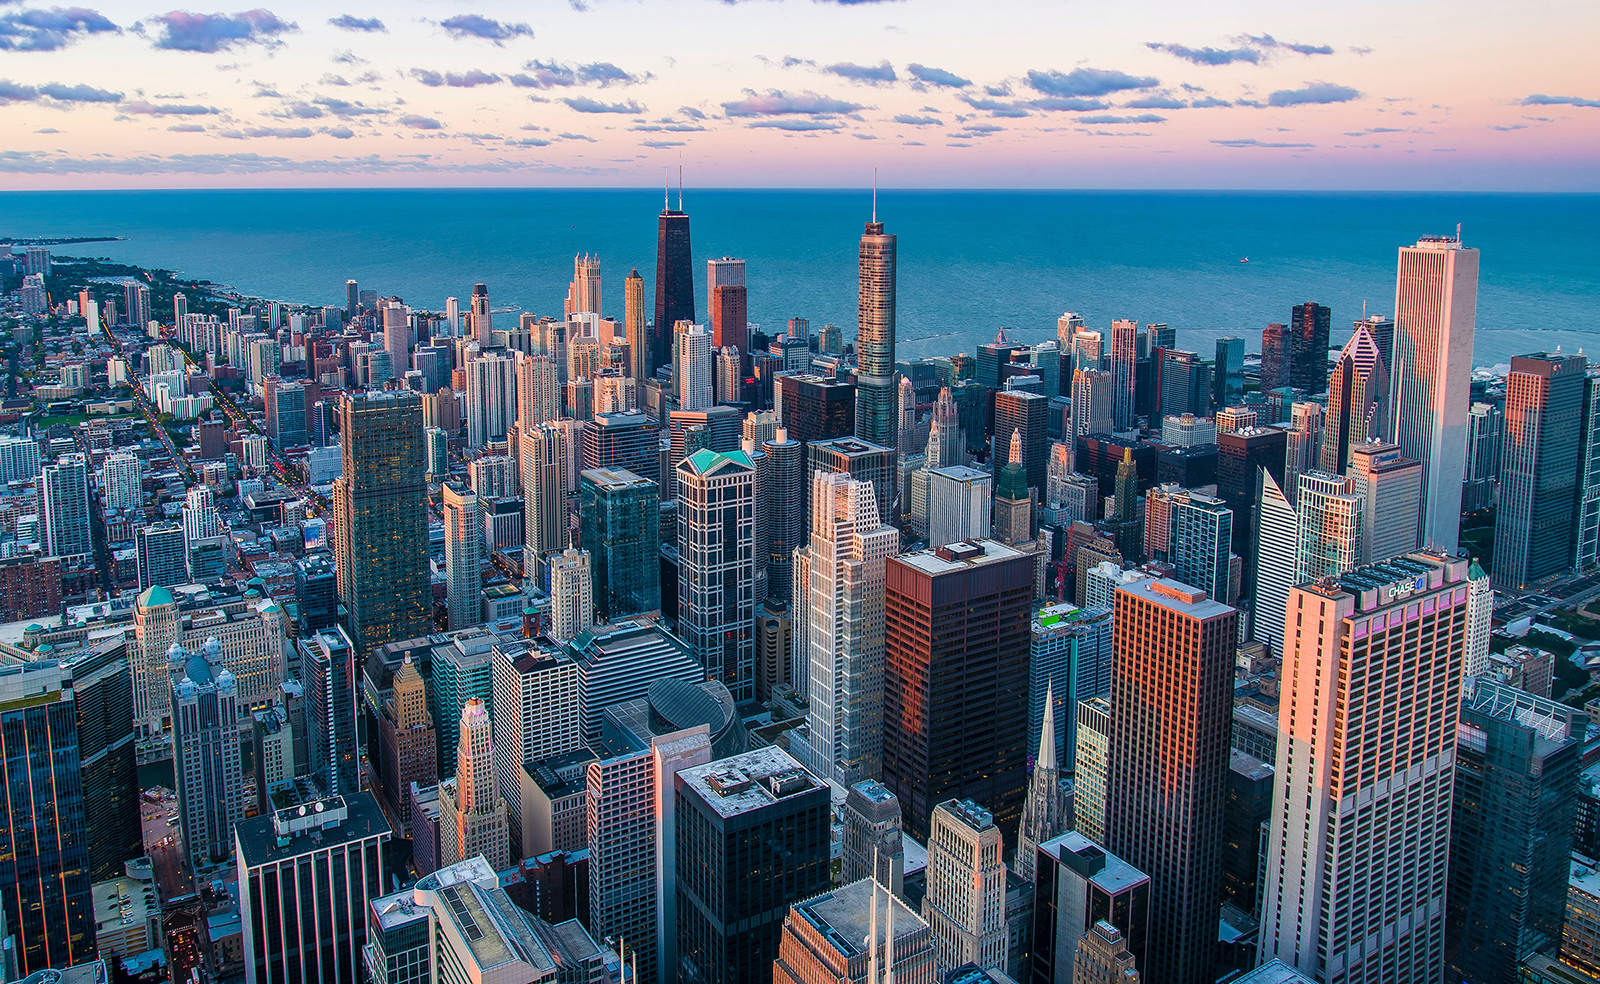 Overlooking downtown Chicago and Lake Michigan. Photo by Pedro Lastra/Unsplash/Creative Commons